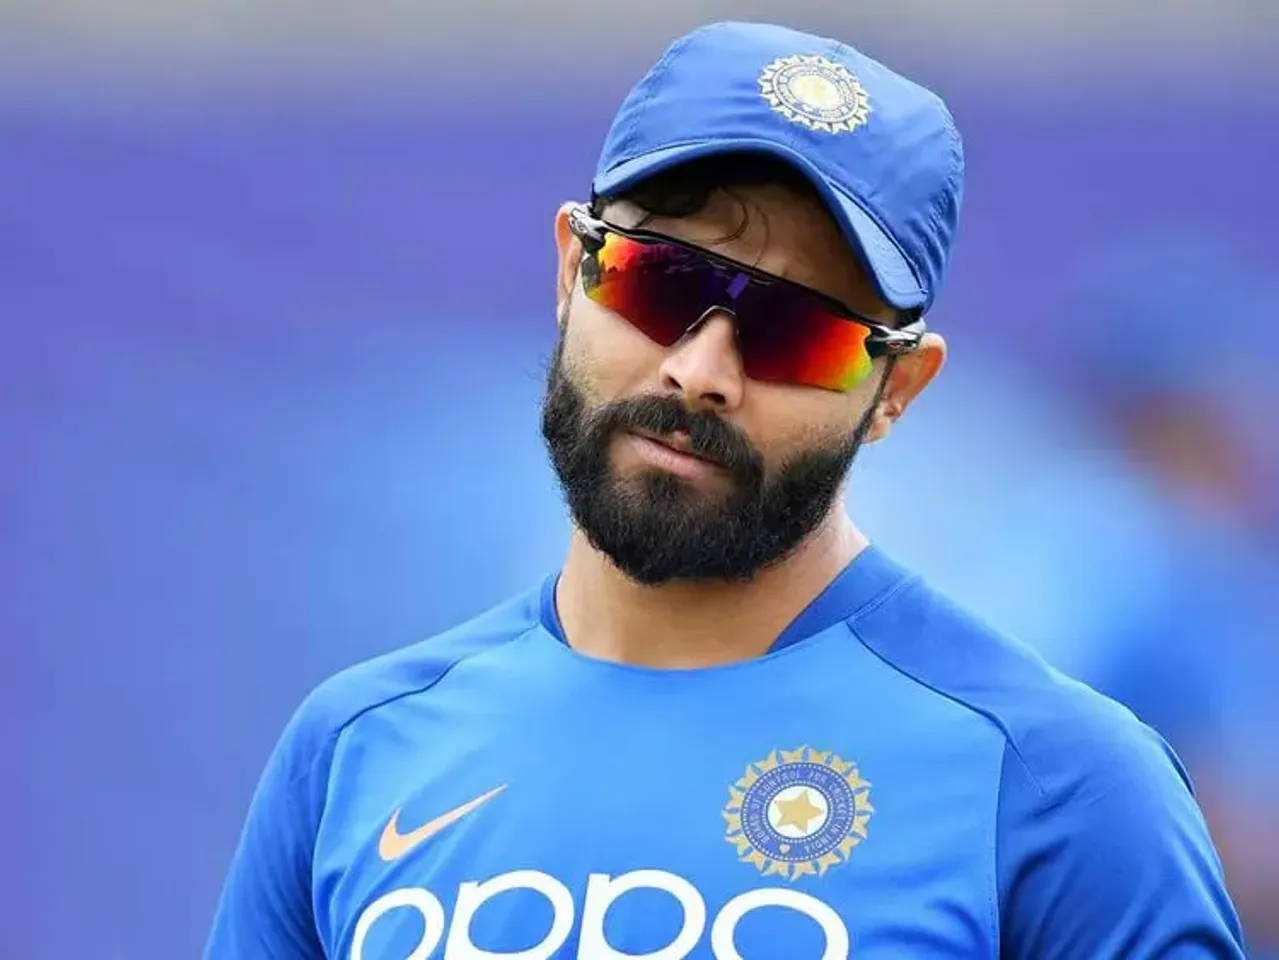 Ravindra Jadeja ruled out of the series - South Africa vs India 2021 series - Cricket News - Sportz Point